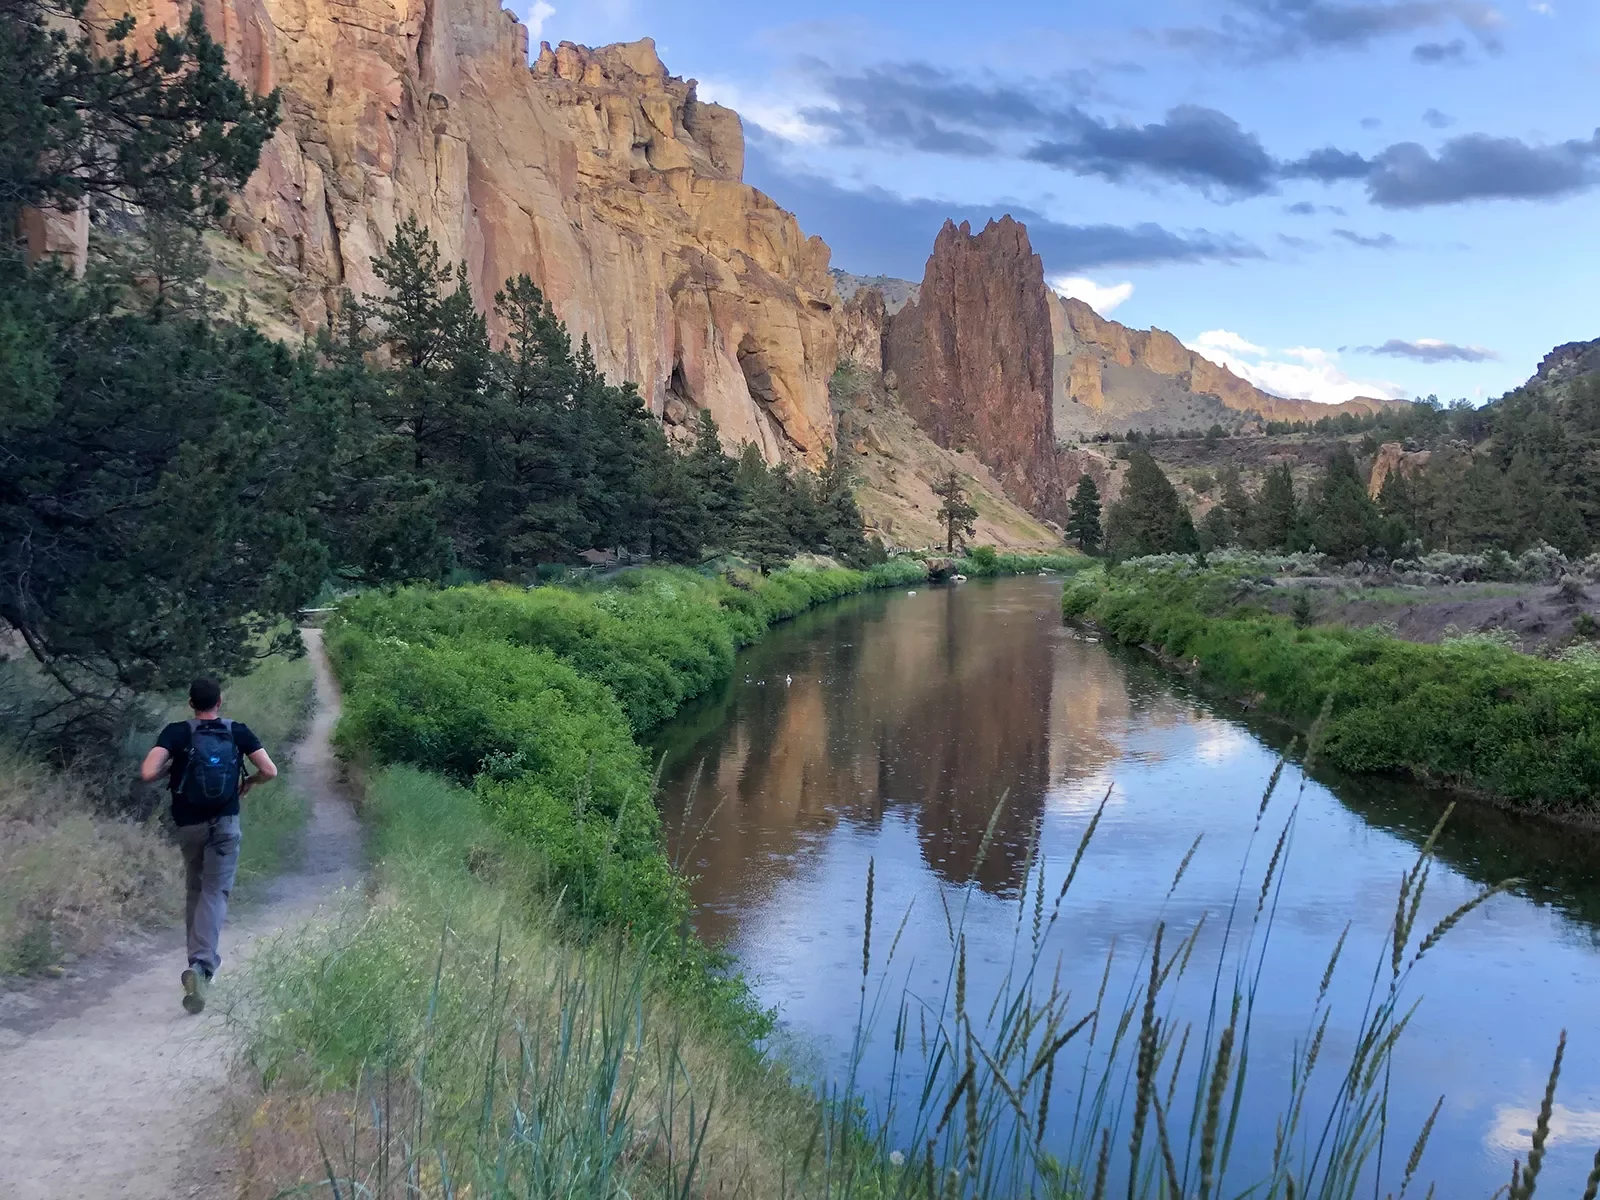 Guest running by small river in Smith Rock Park.